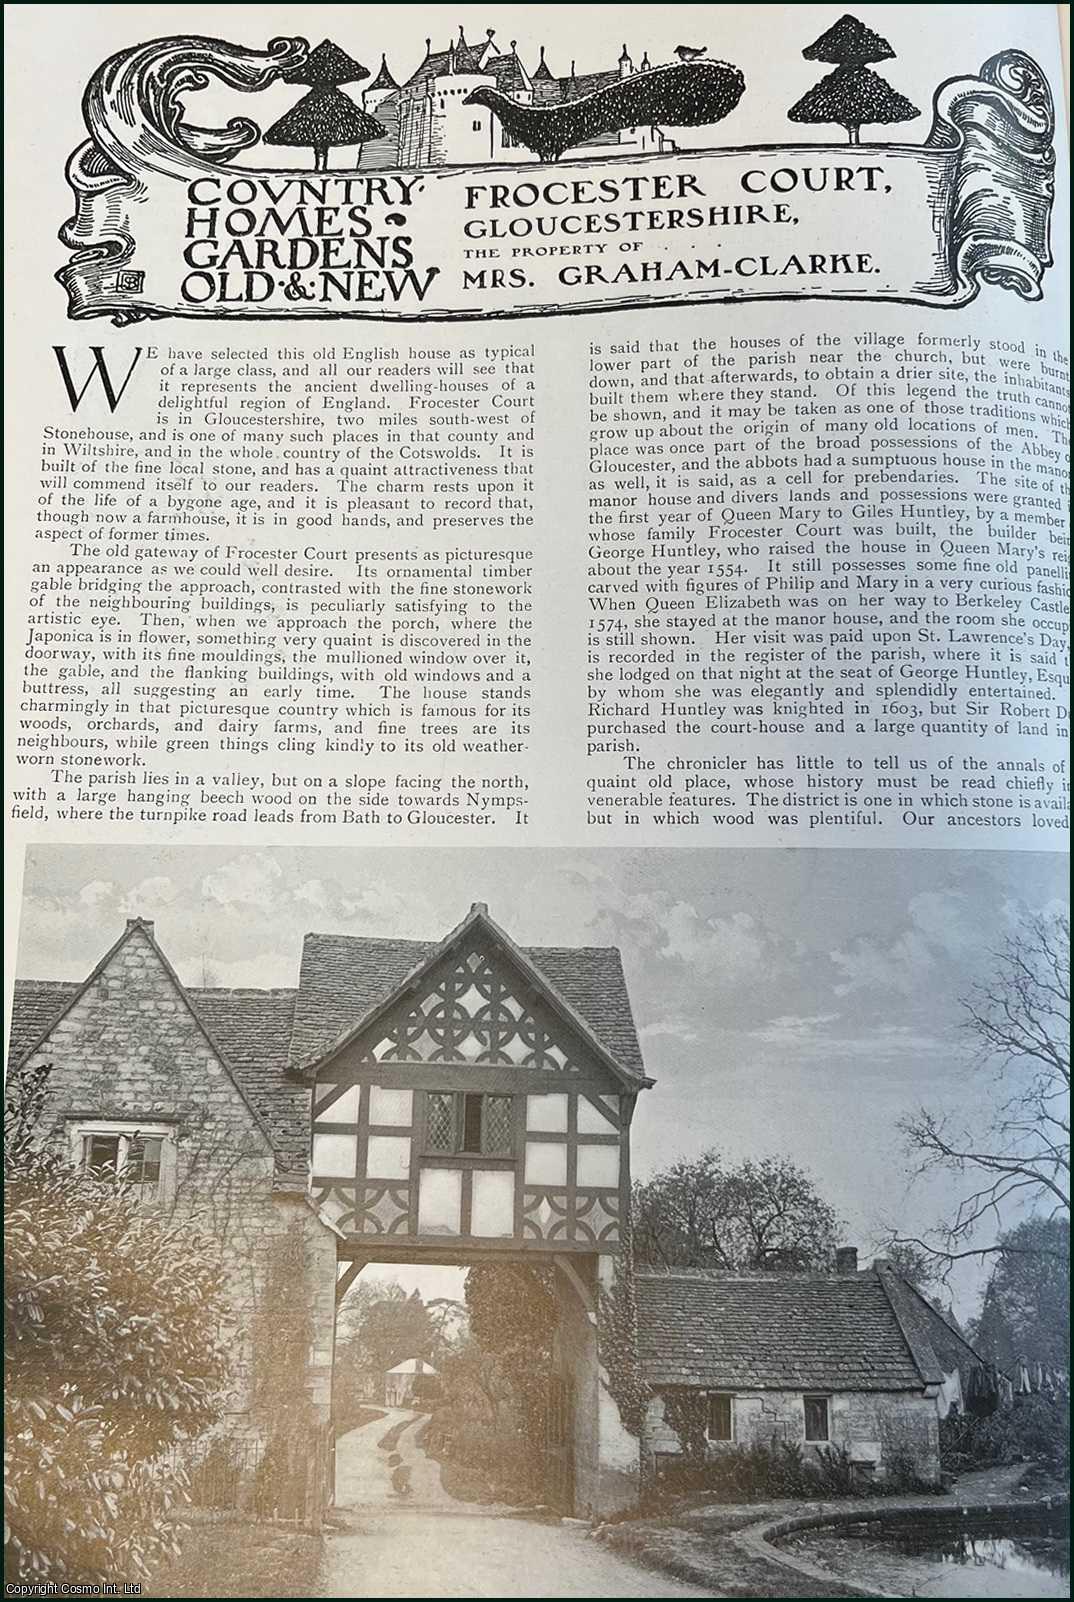 J.W. Willis Bund - Two Cotswold Manor Houses : Biddestone & Doughton. Several pictures and accompanying text, removed from an original issue of Country Life Magazine, 1905.